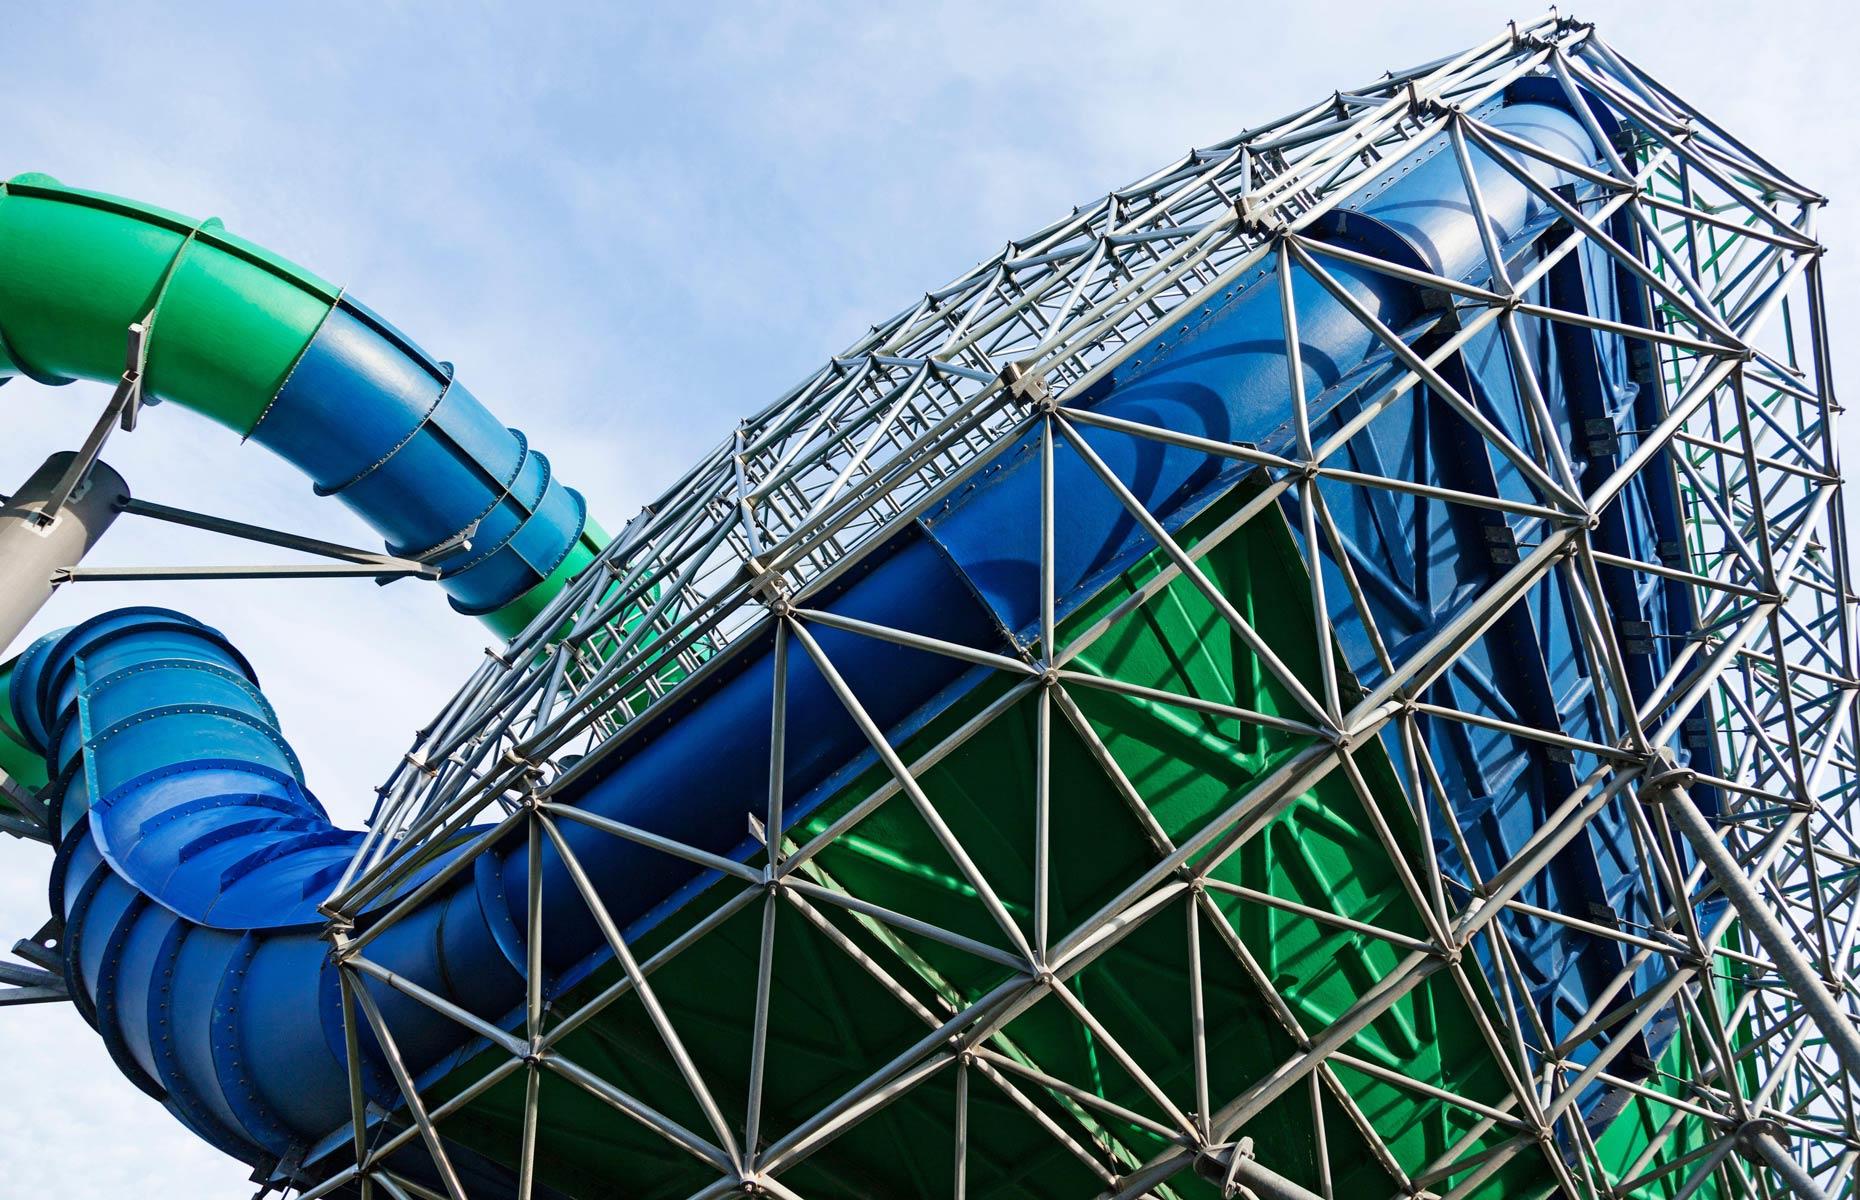 <p>As well as the high-speed Twister and Tornado water slides (Tornado is pictured here), this waterpark in Billund also has a year-round 'wild river' slide. At 551 feet long (168m), it starts and ends in the indoor Aquadome but also winds around outside. The complex has a good variety of indoor and outdoor pools, as well as a sauna and a spa. Dare the kids to dive down in the secret cave pool to spot the tropical fish, but watch out for the giant tipping bucket as you roam...</p>